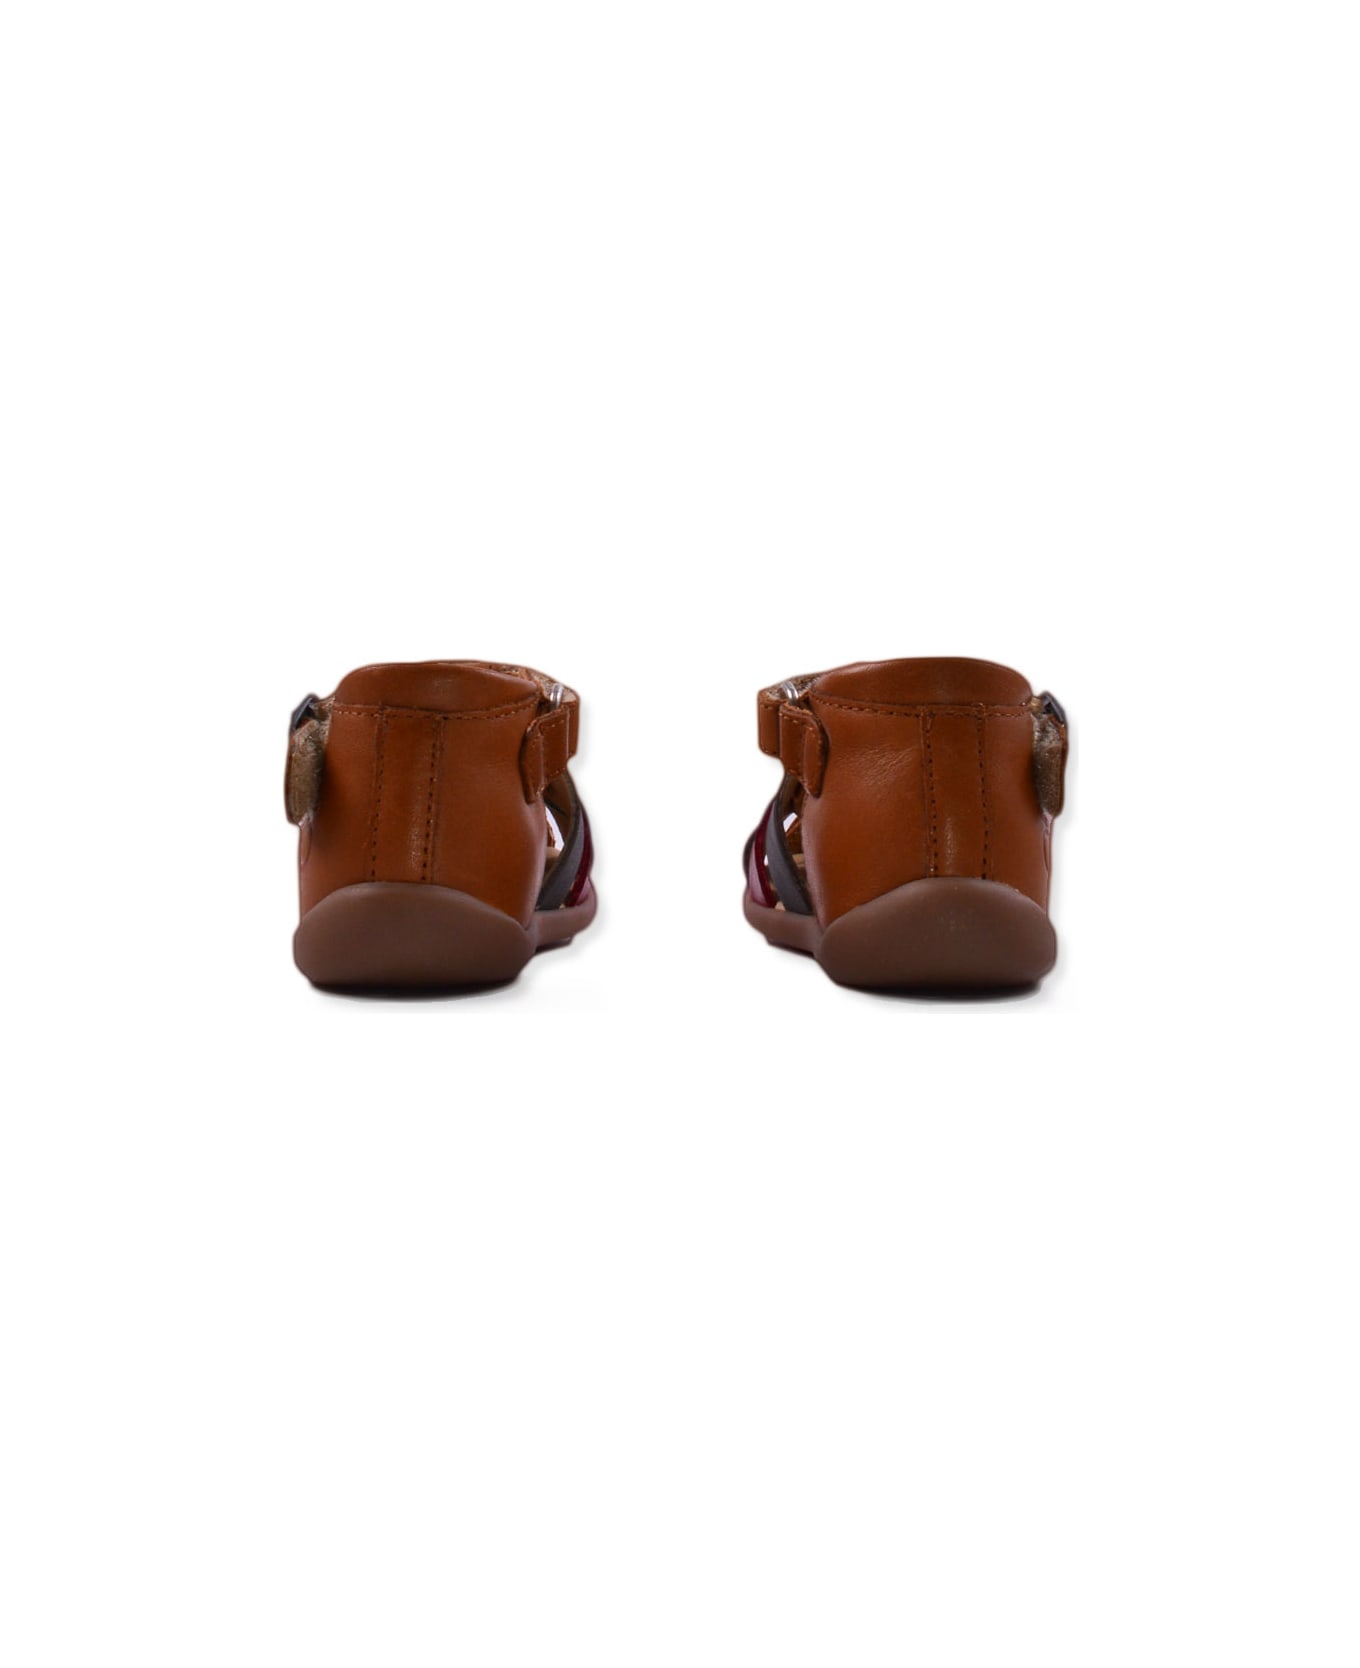 Pom d'Api Sandals In Colored Leather - Brown